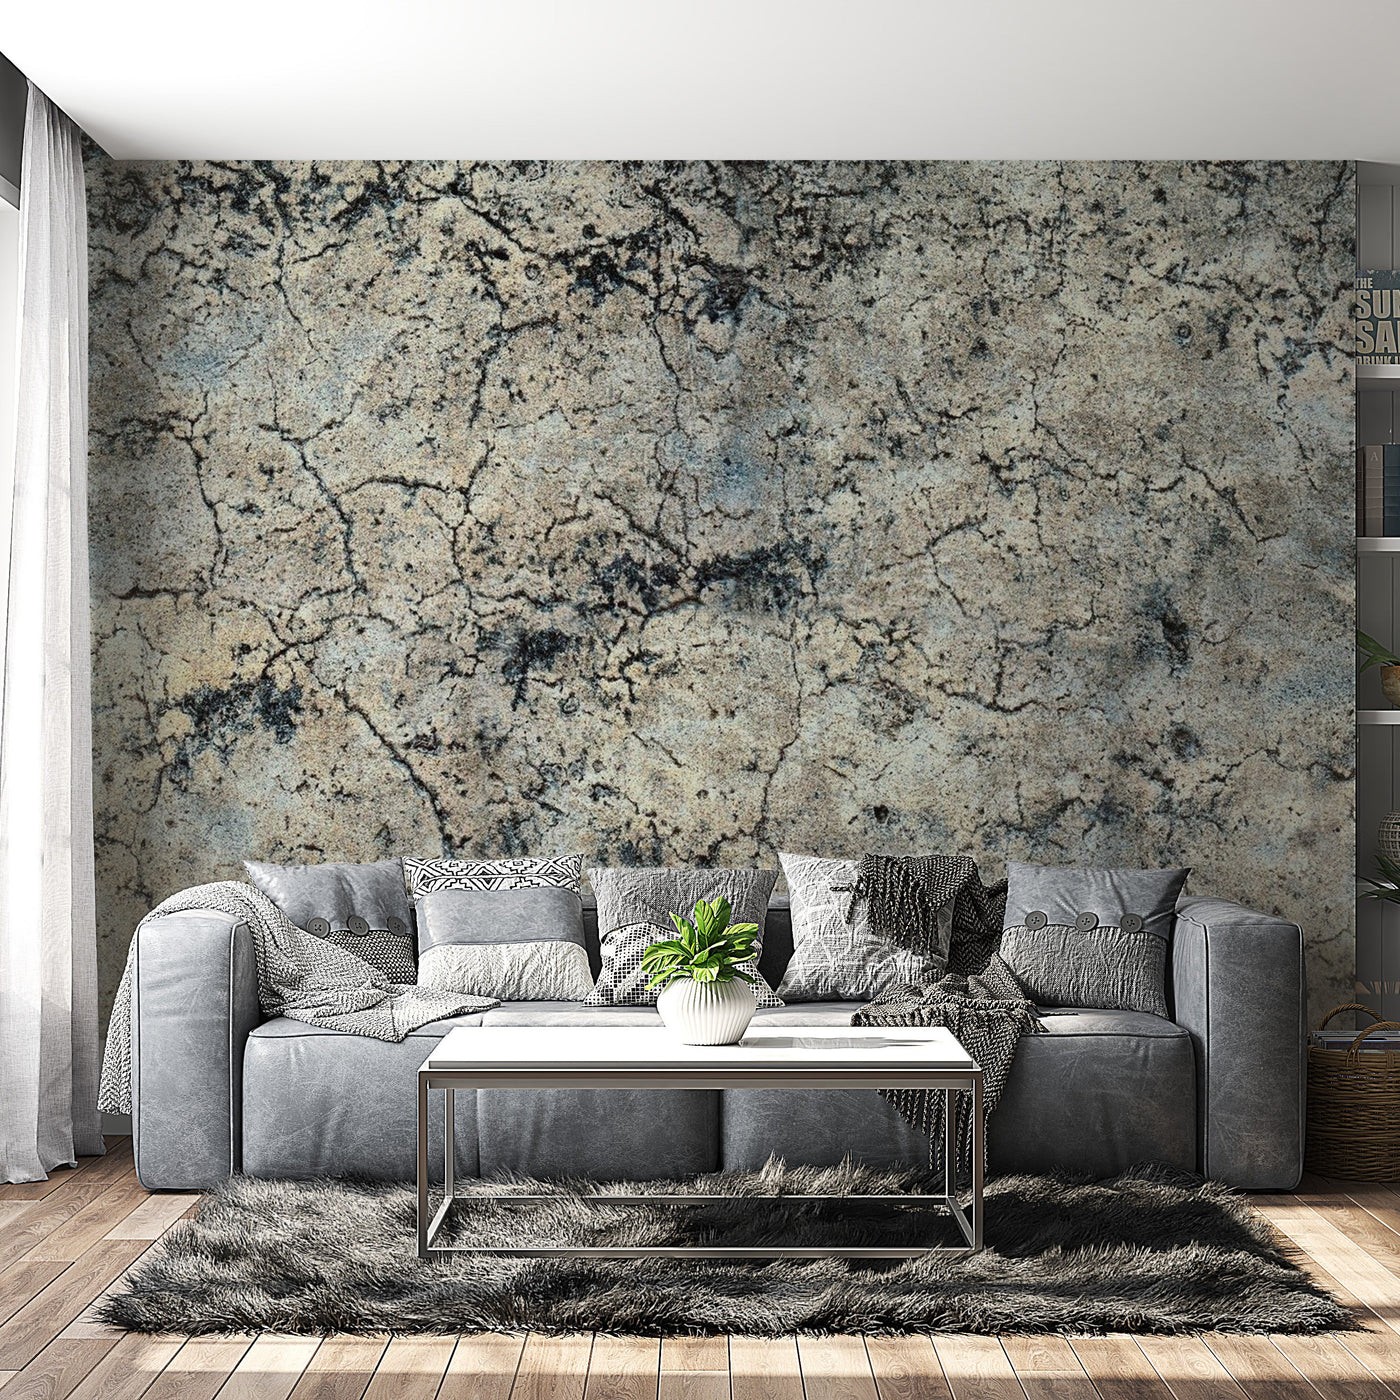 Peel & Stick Wall Mural - Old Cracked Concrete Wall - Removable Wall Decals